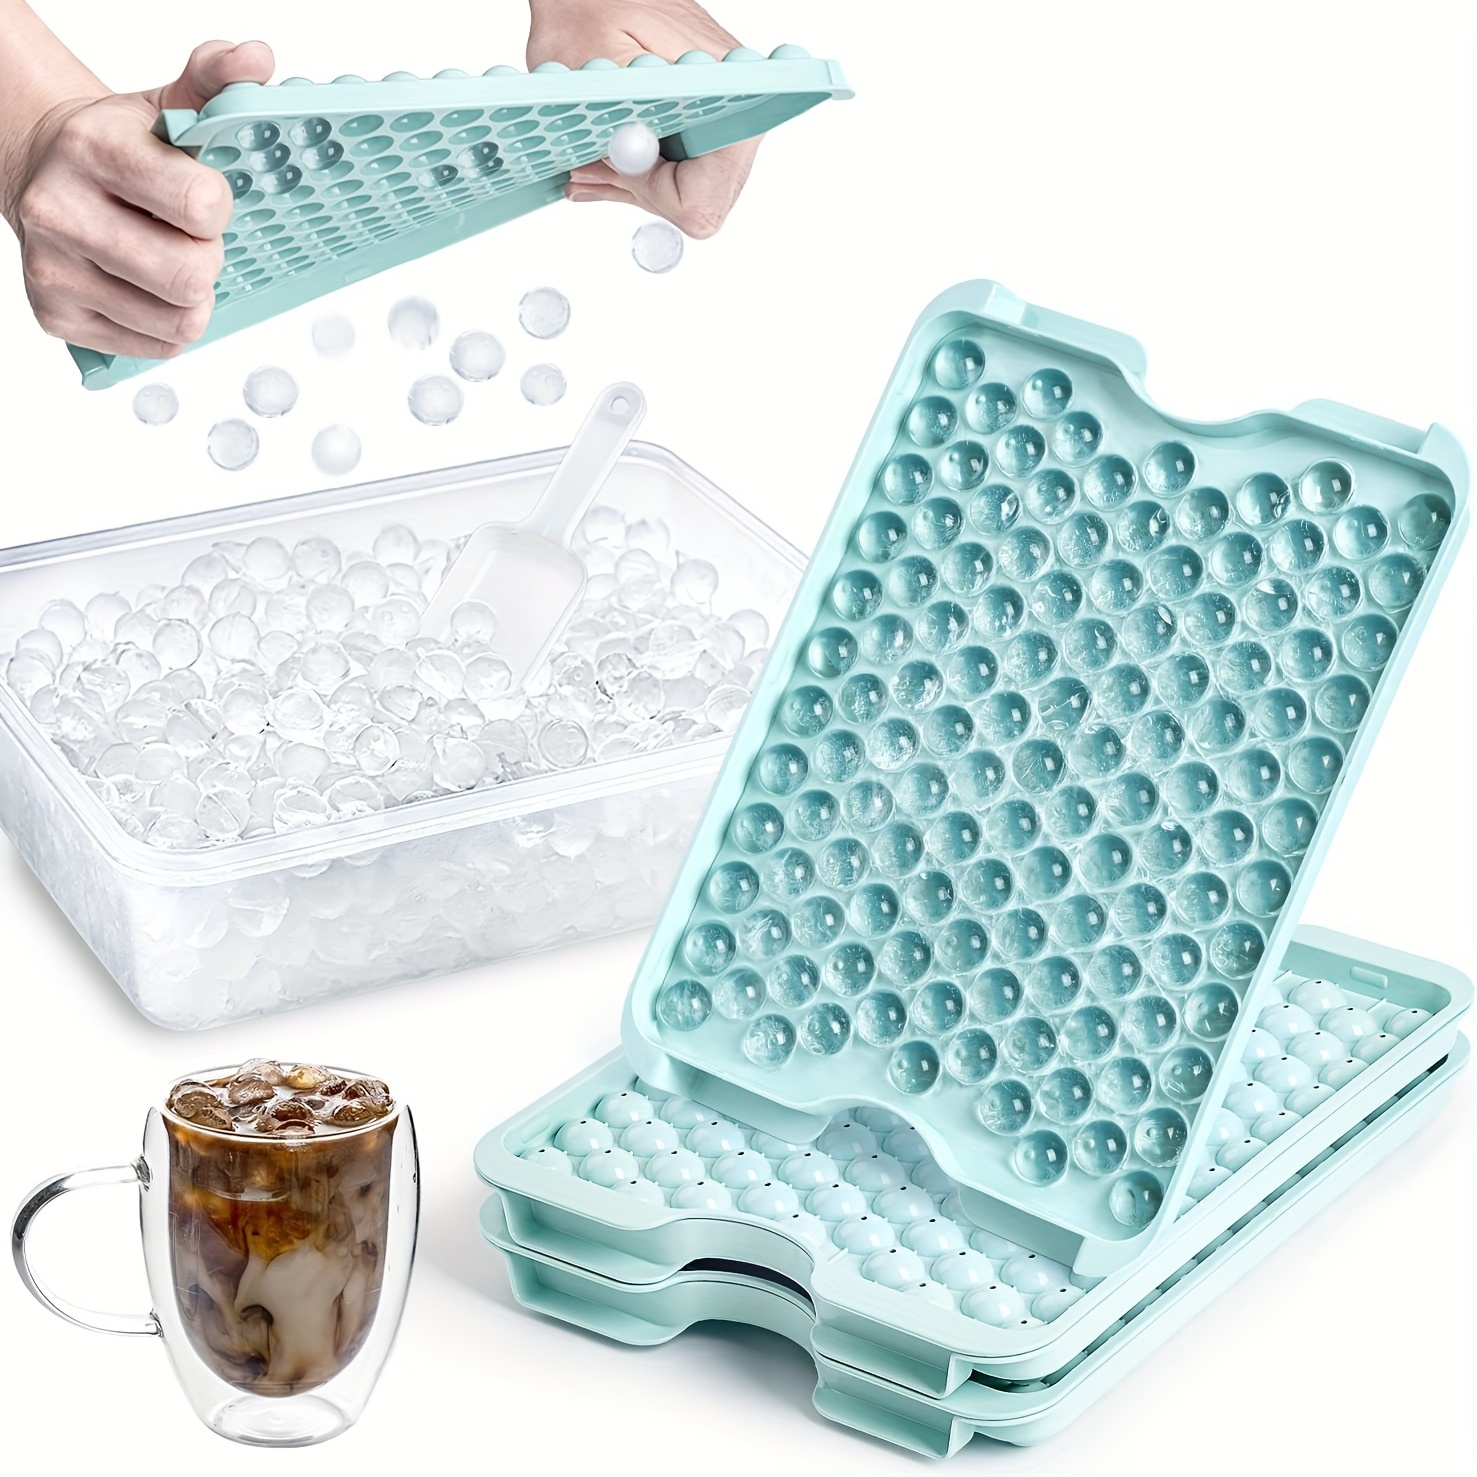 Ice Cube Tray With Lid And Storage Bin, Easy-release 55 Ice Tray With  Spill-resistant Cover, Container, Scoop - Ice Cream Tools - AliExpress